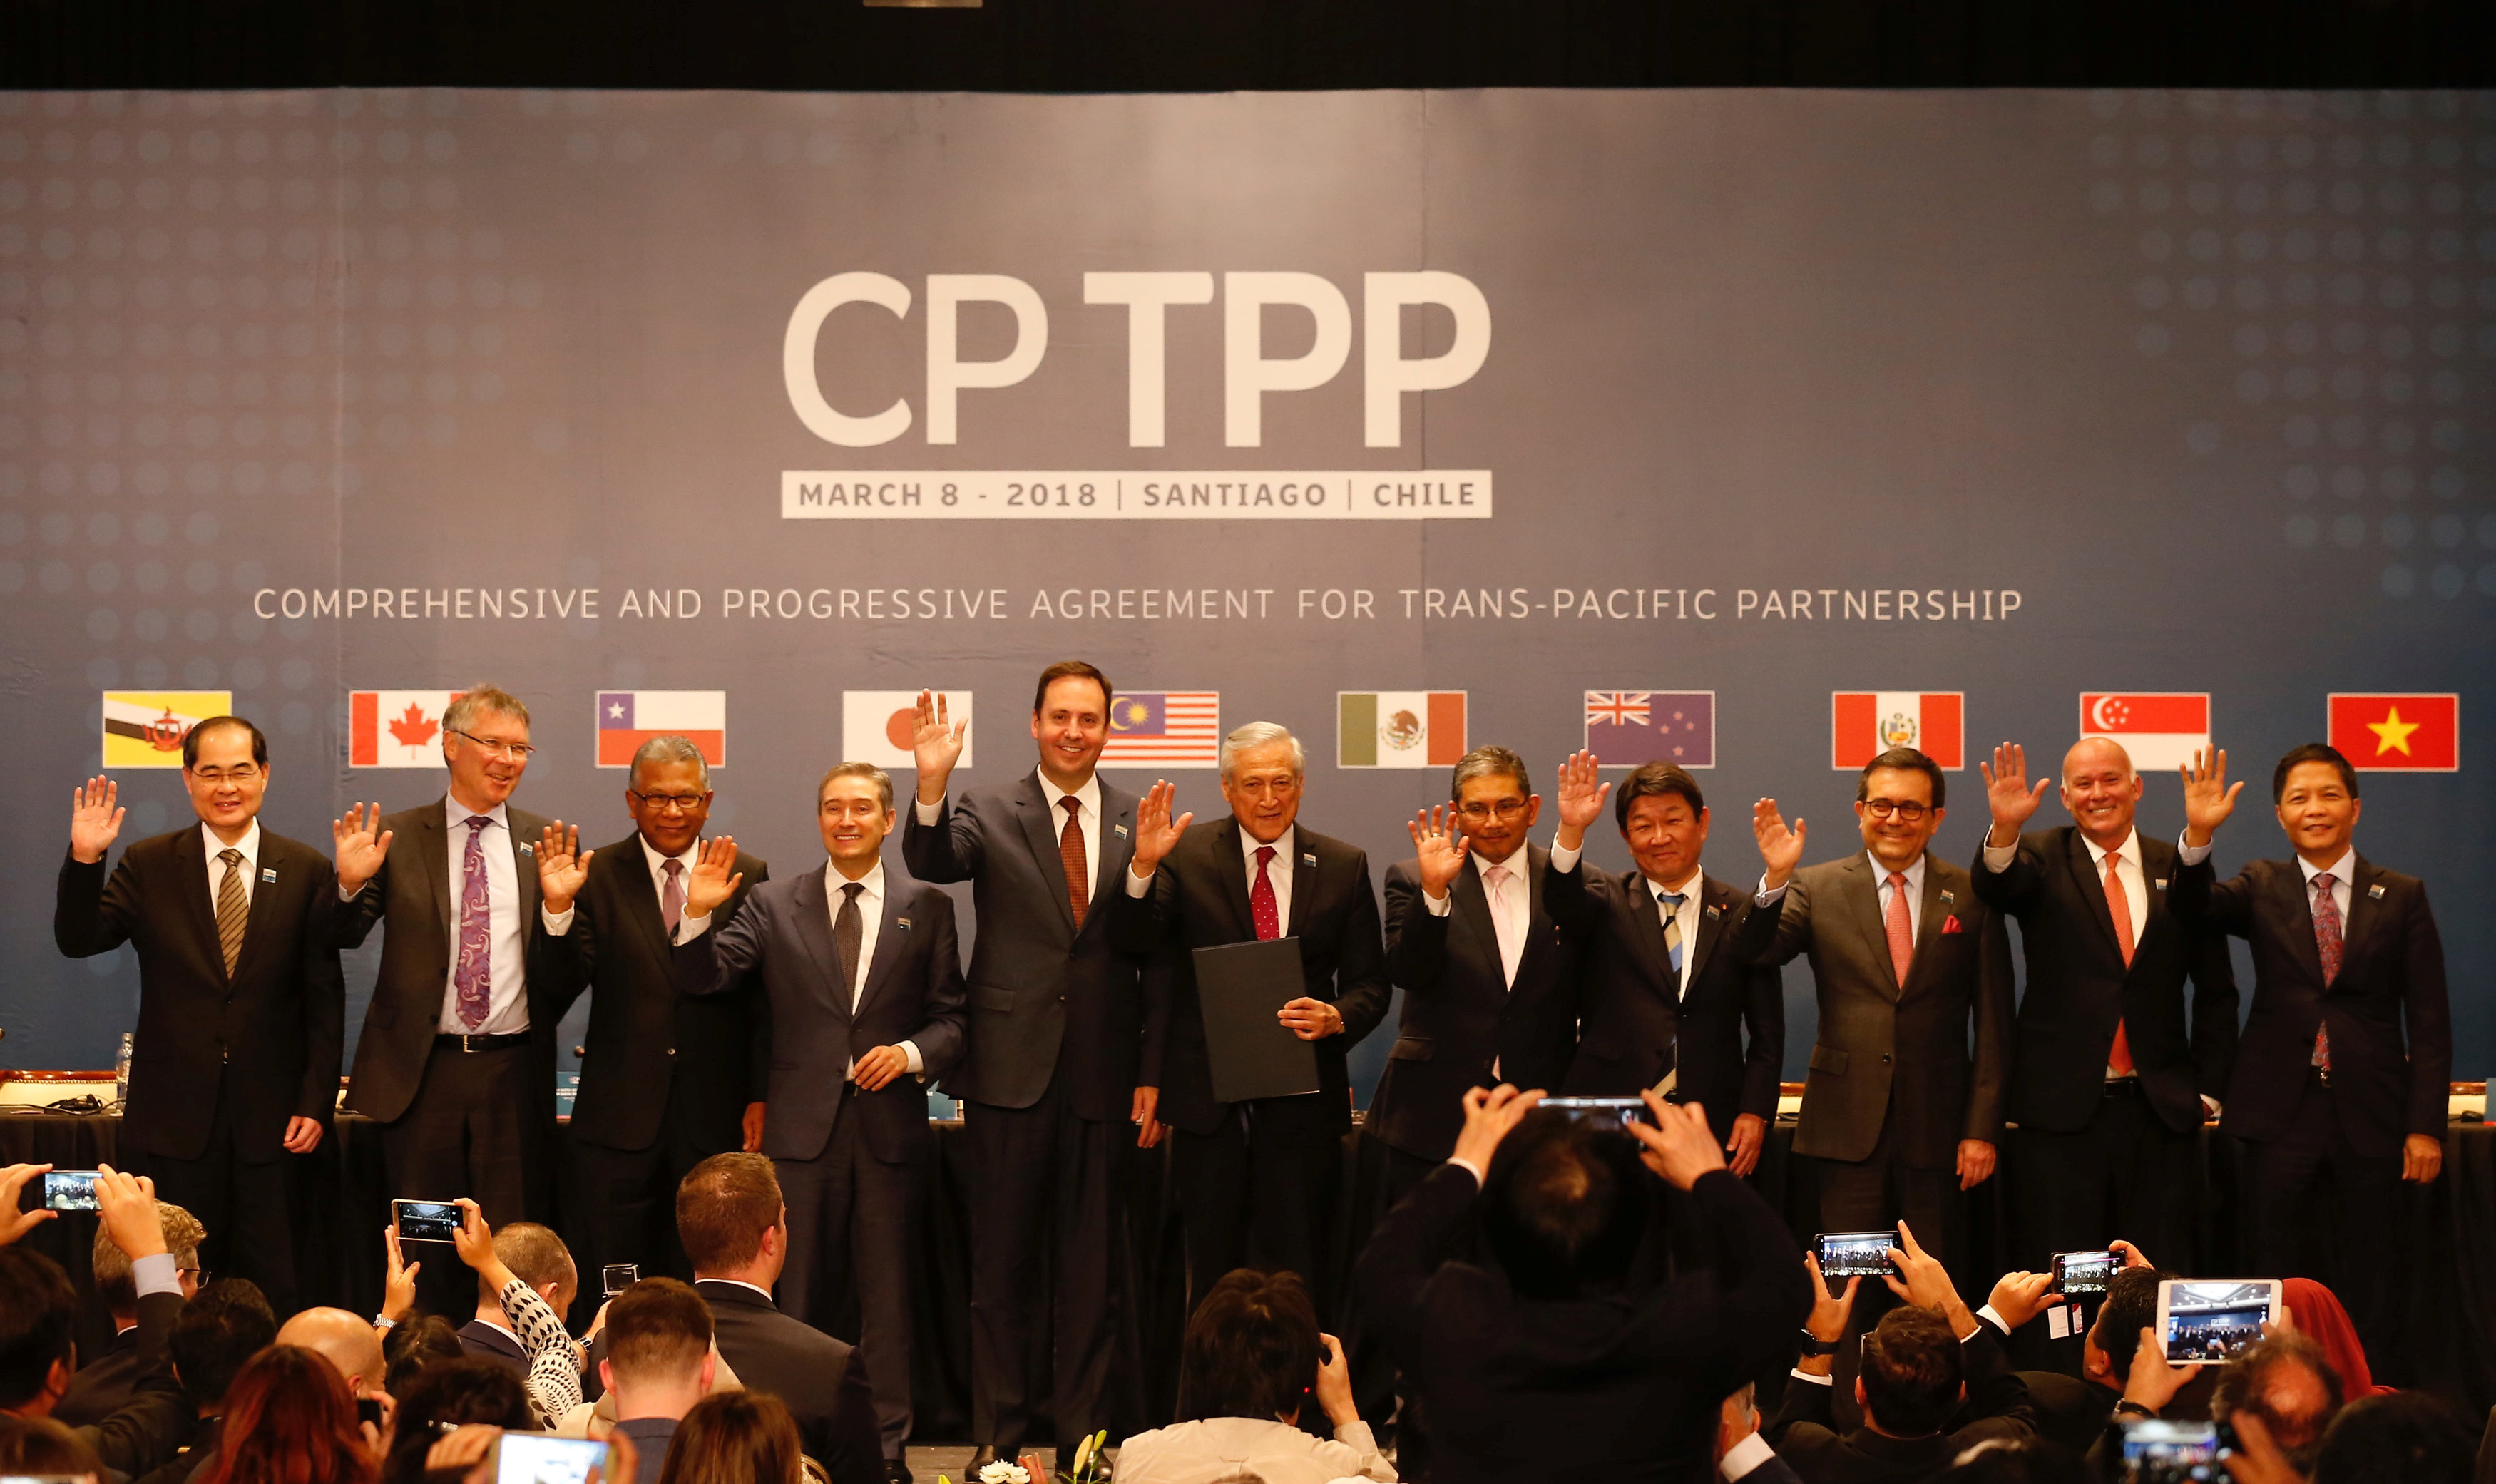 Members of Trans-Pacific Partnership trade deal pose for an official picture after the signing agreement ceremony in Santiago